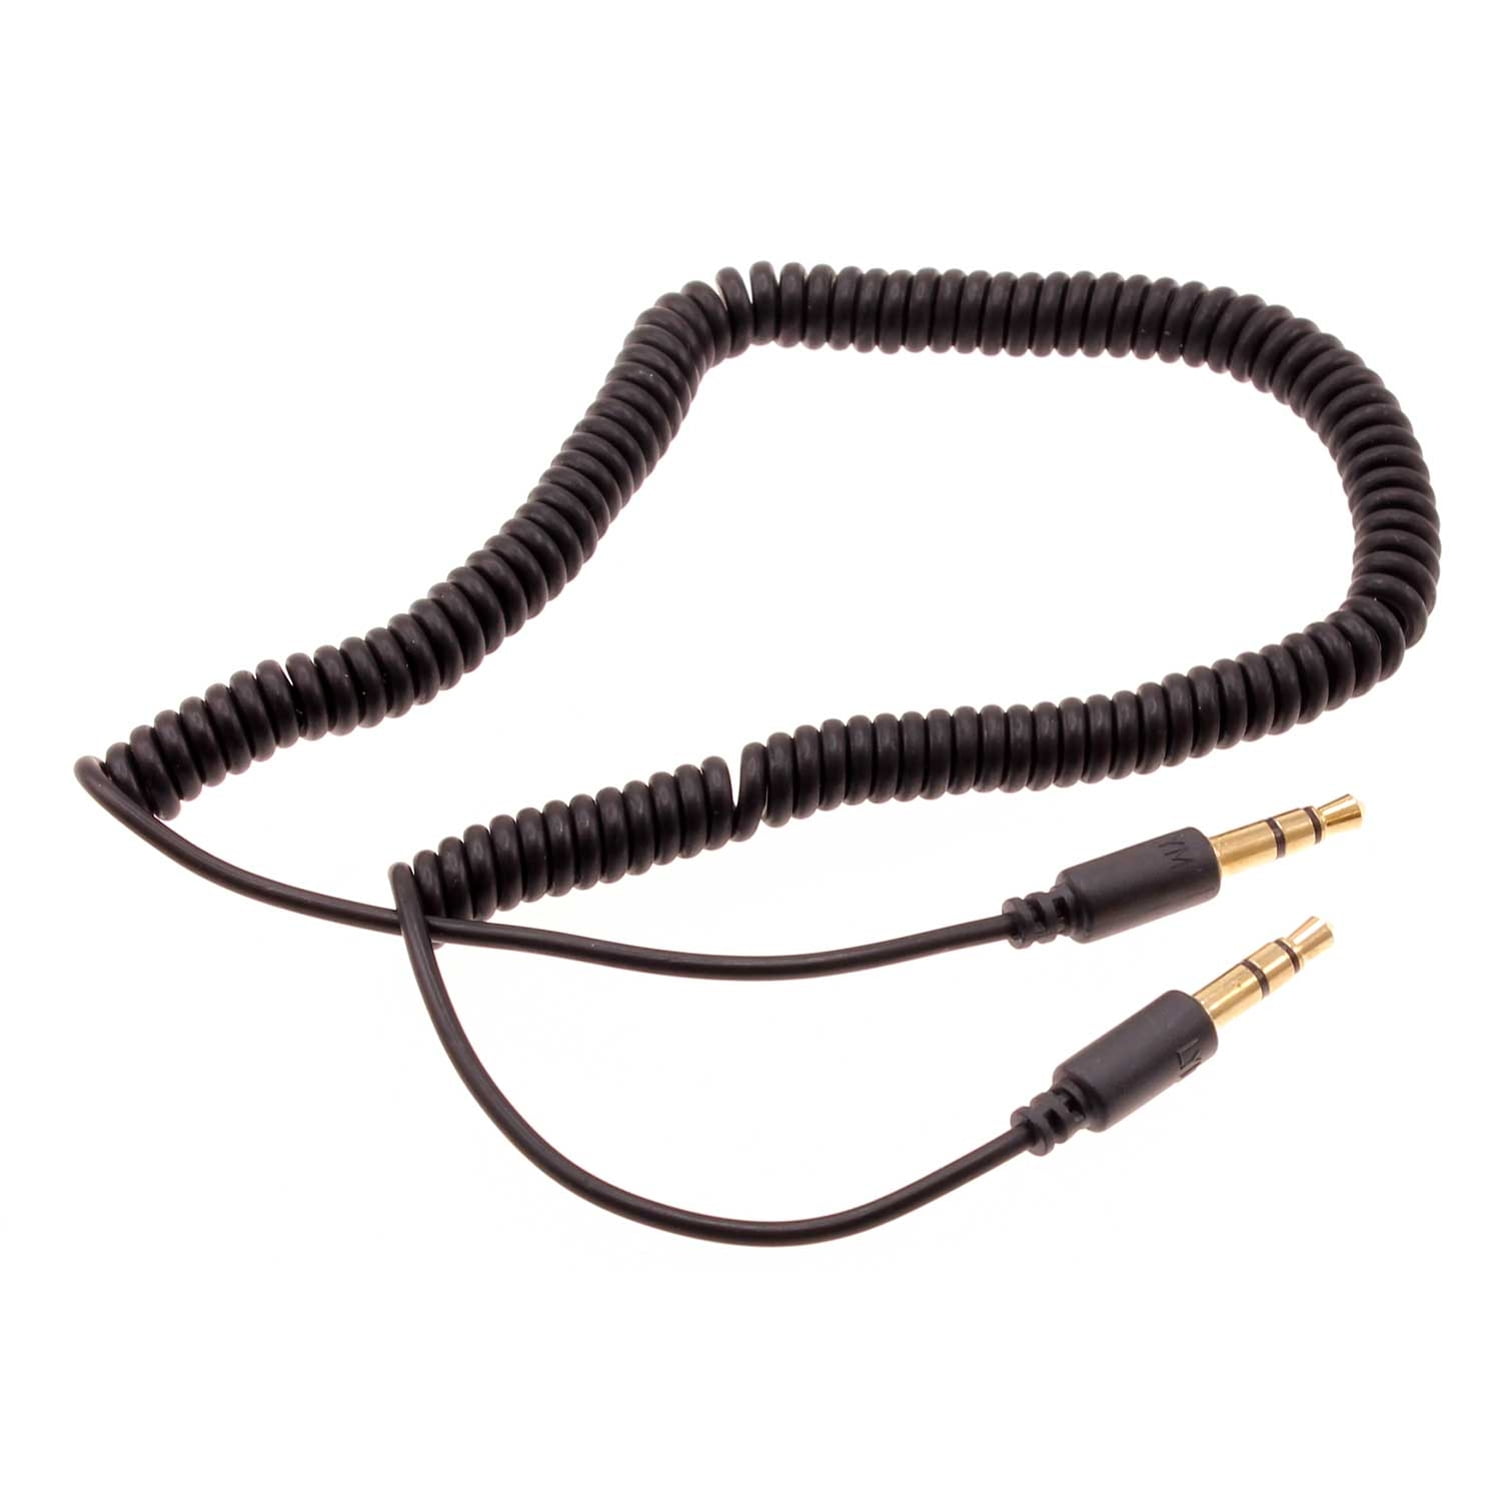 BLACK COILED AUX CABLE CAR STEREO WIRE AUDIO SPEAKER CORD for PHONE TABLETS 